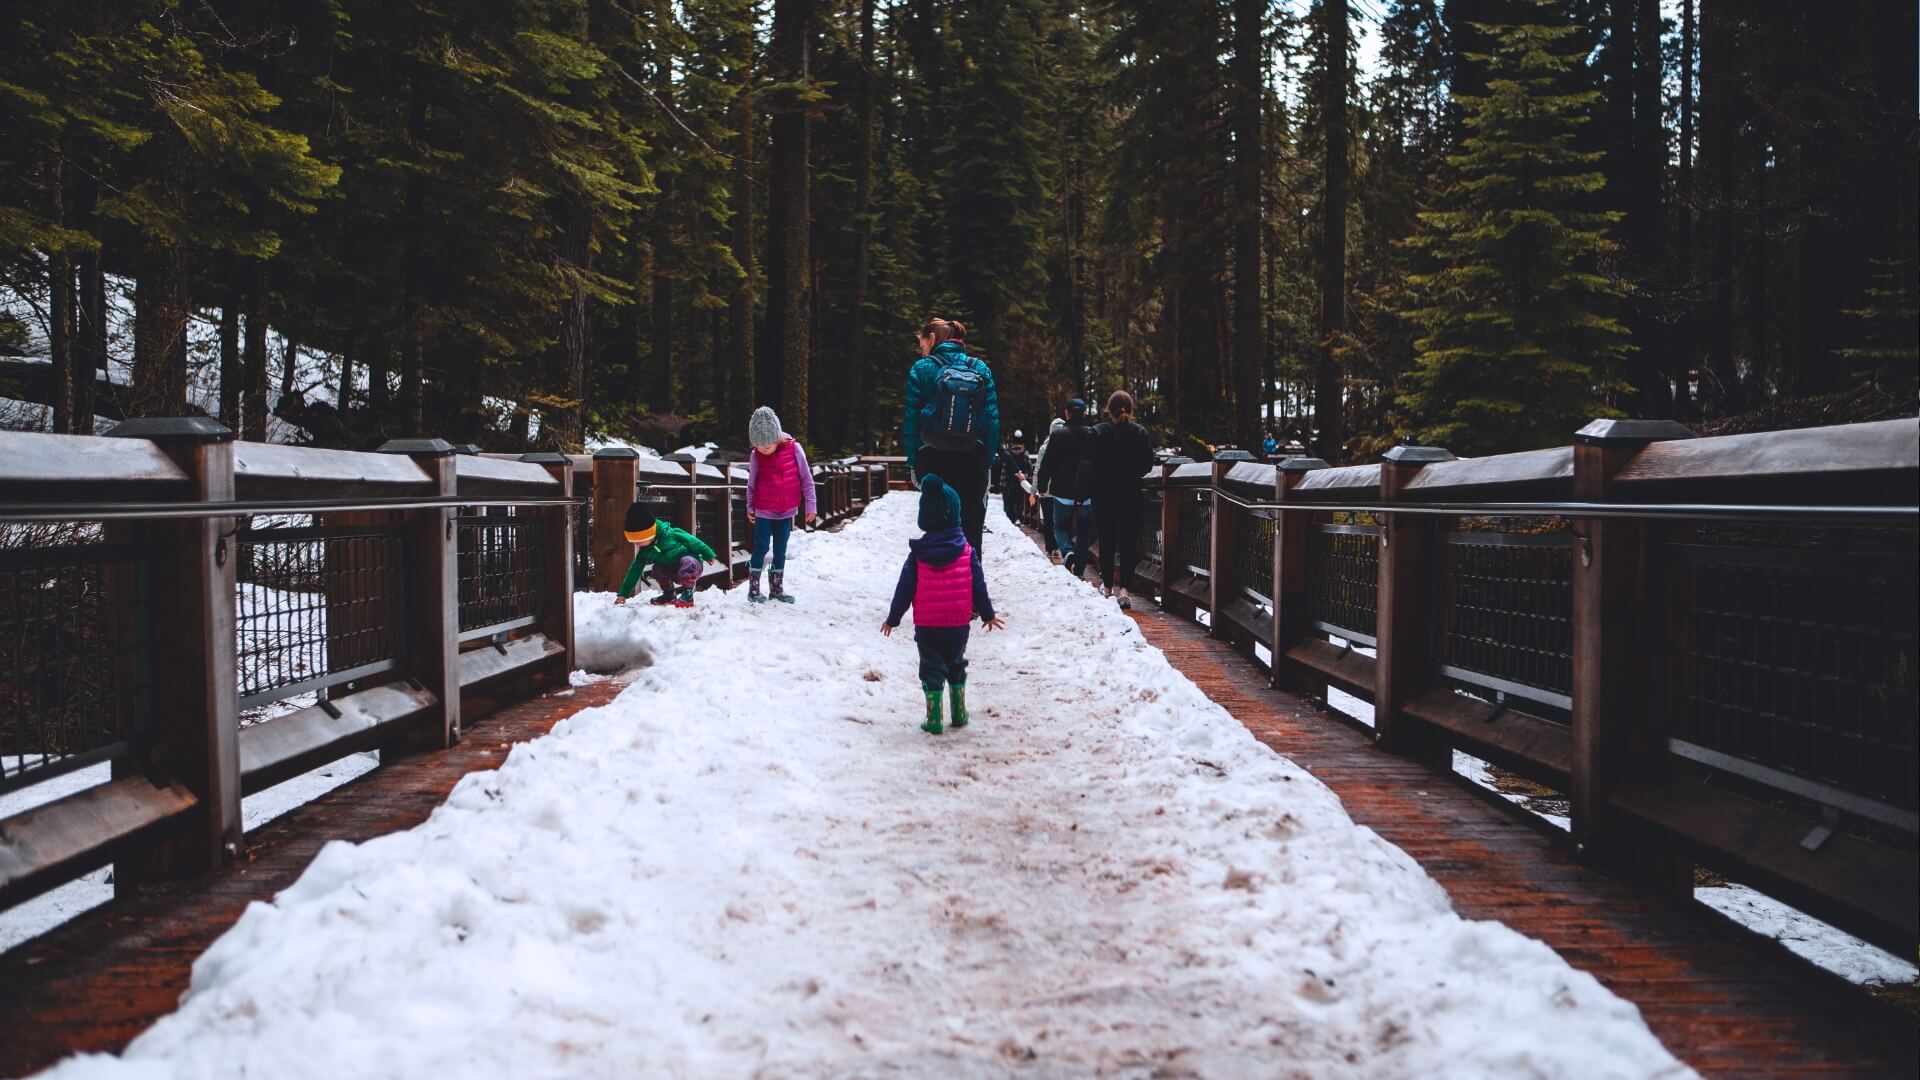 A family with children walking on a snowy trail at Yosemite National Park in winter, enjoying the environment.